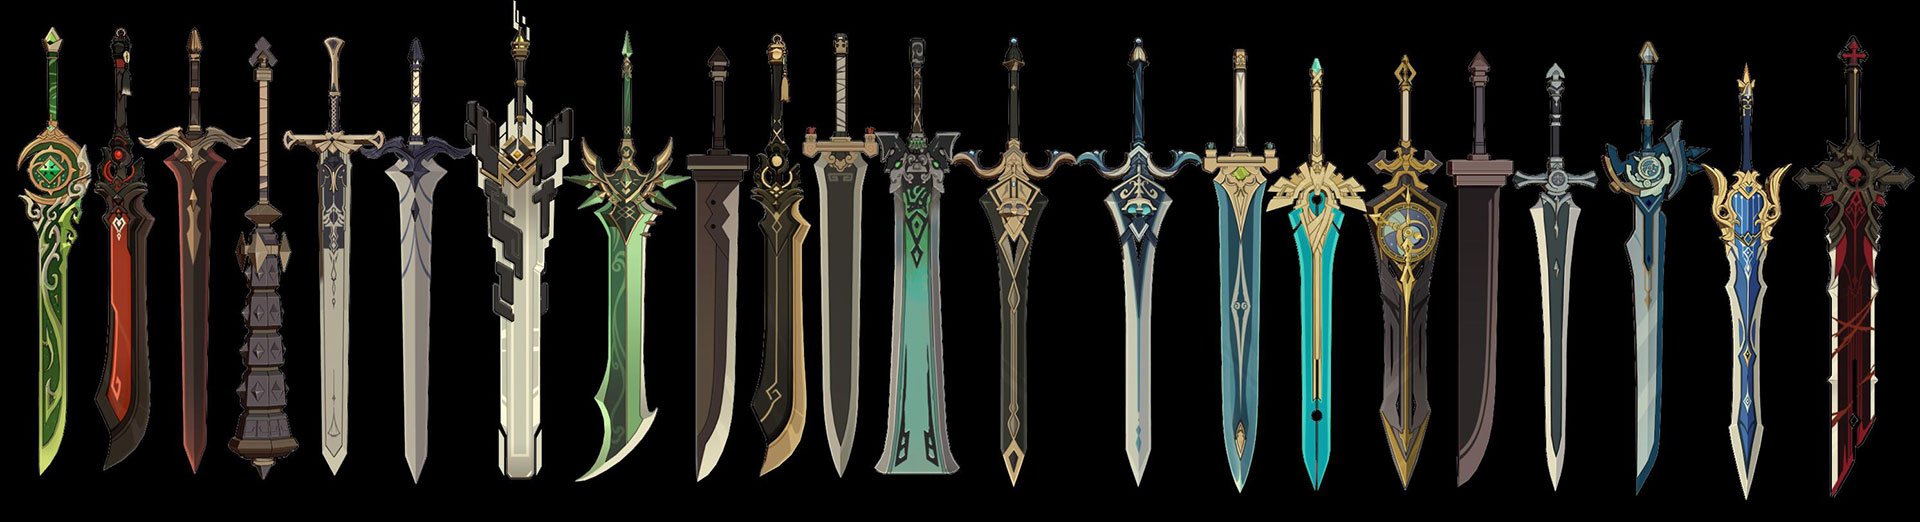 All The Swords